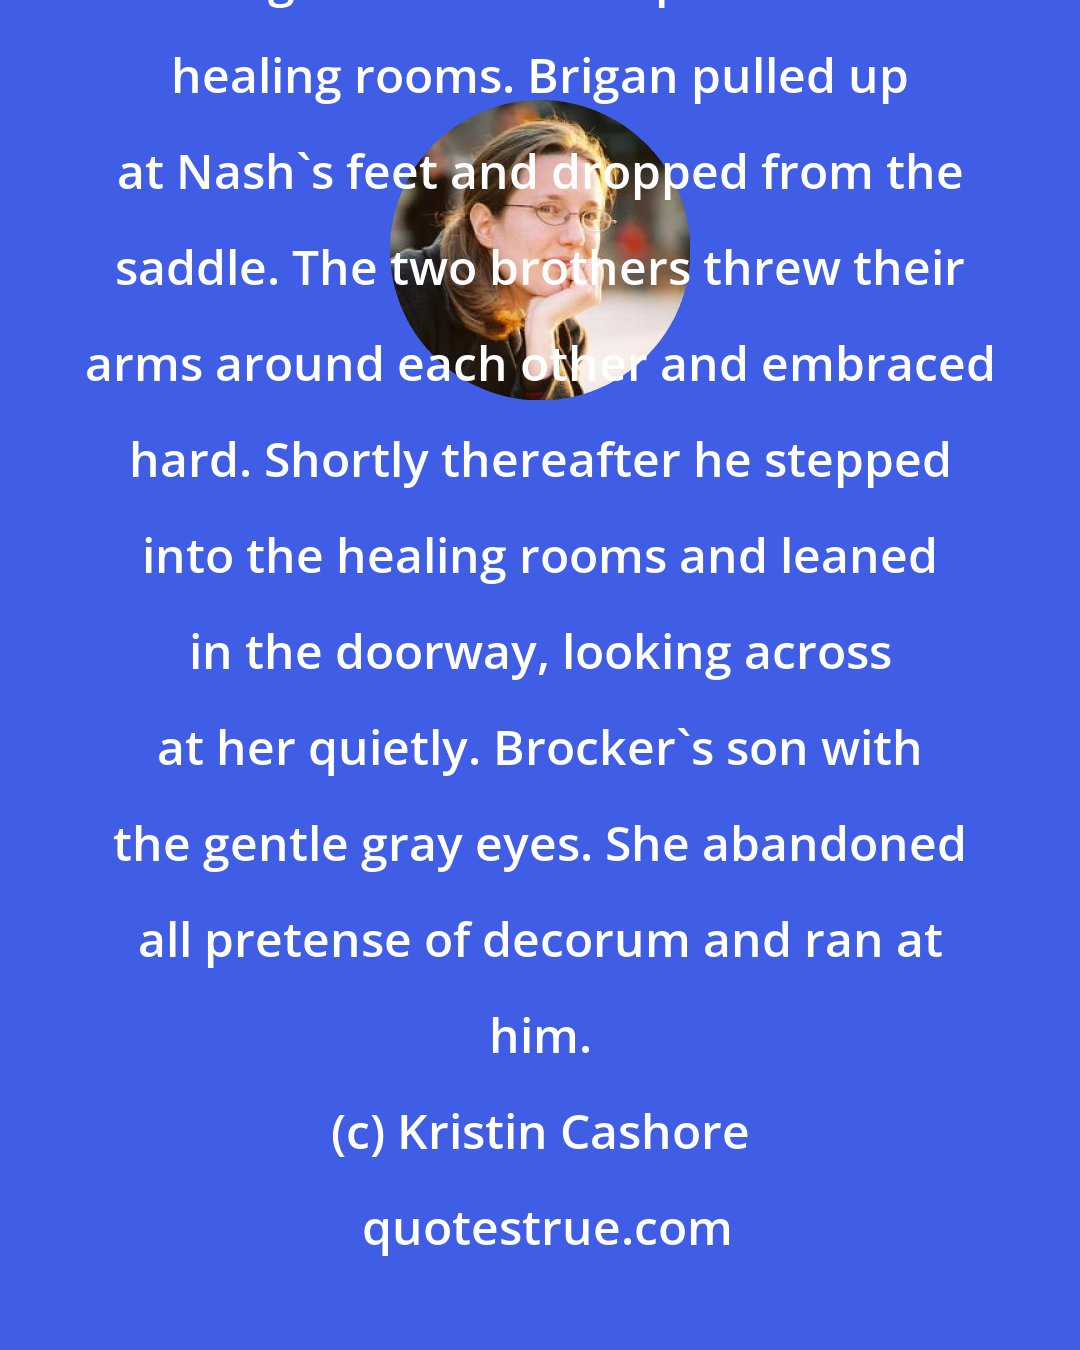 Kristin Cashore: Through an arrow loop in the wall she saw a familiar horse and rider tearing across the camp toward the healing rooms. Brigan pulled up at Nash's feet and dropped from the saddle. The two brothers threw their arms around each other and embraced hard. Shortly thereafter he stepped into the healing rooms and leaned in the doorway, looking across at her quietly. Brocker's son with the gentle gray eyes. She abandoned all pretense of decorum and ran at him.